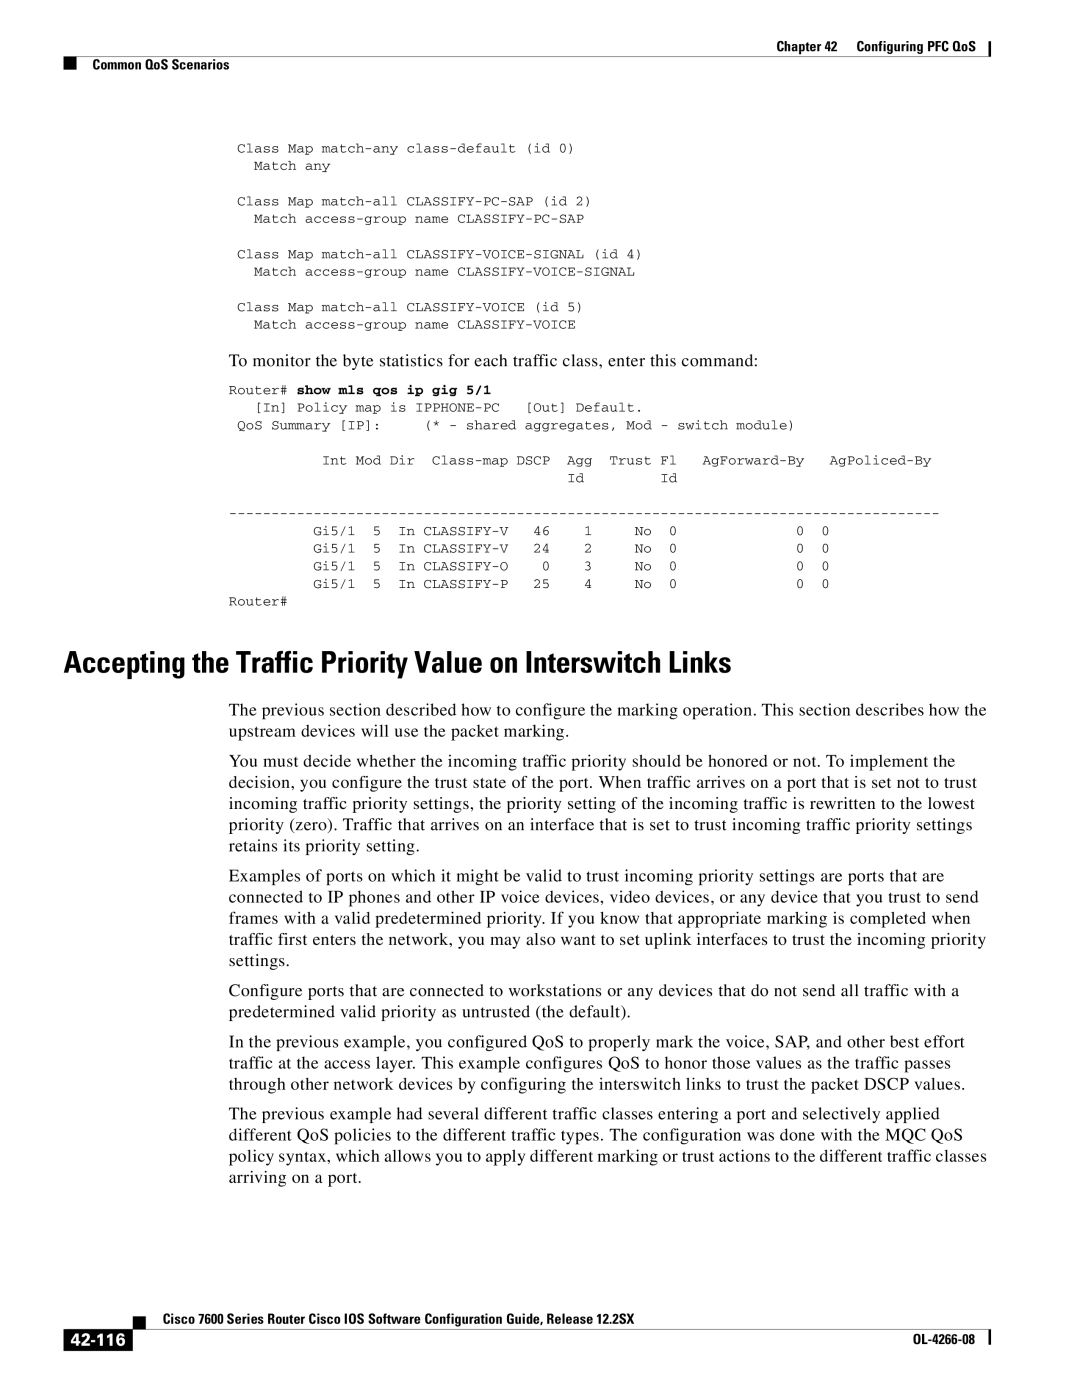 Cisco Systems OL-4266-08 manual Accepting the Traffic Priority Value on Interswitch Links, 42-116 